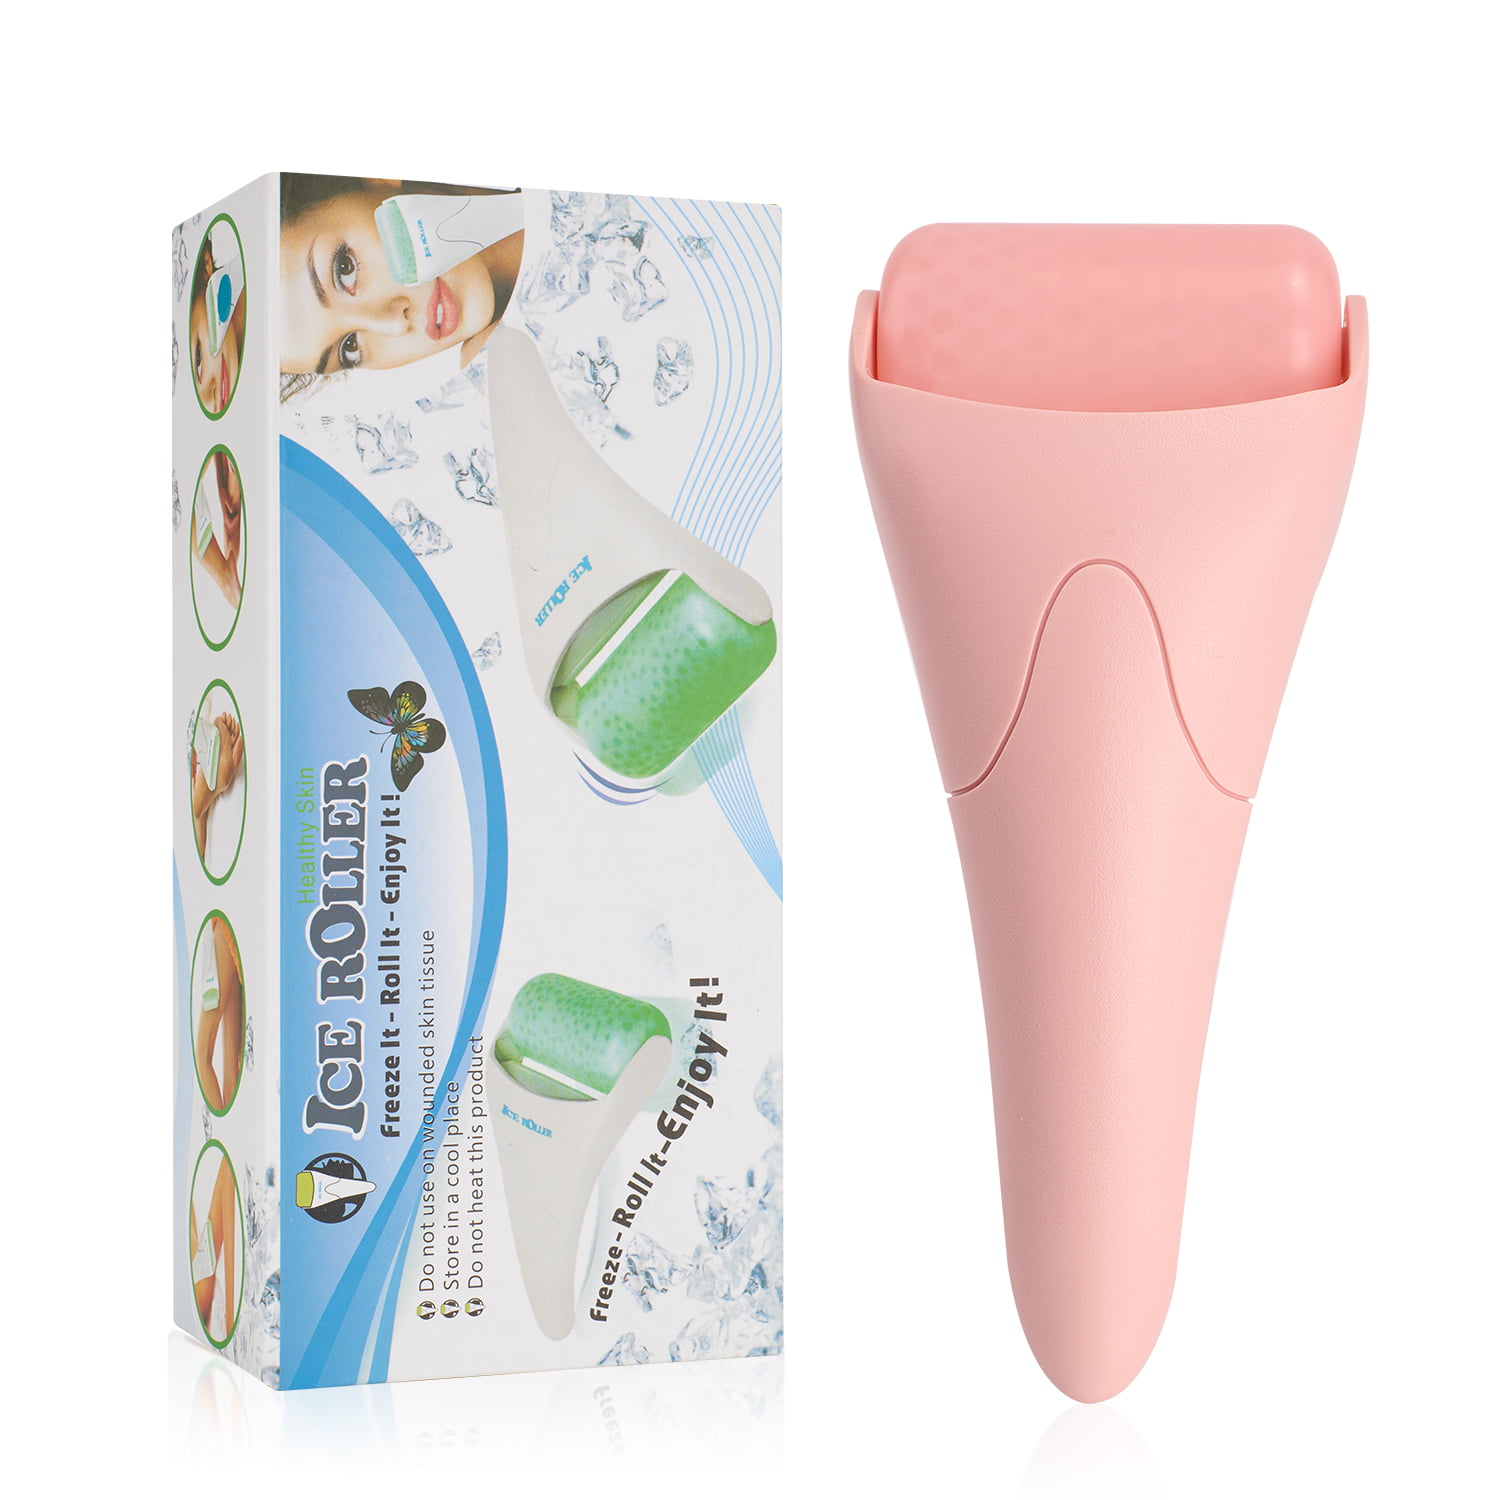 Ingeniero ICE ROLLER FACE MASSAGER FACE AND EYE ICE ROLLER - Price